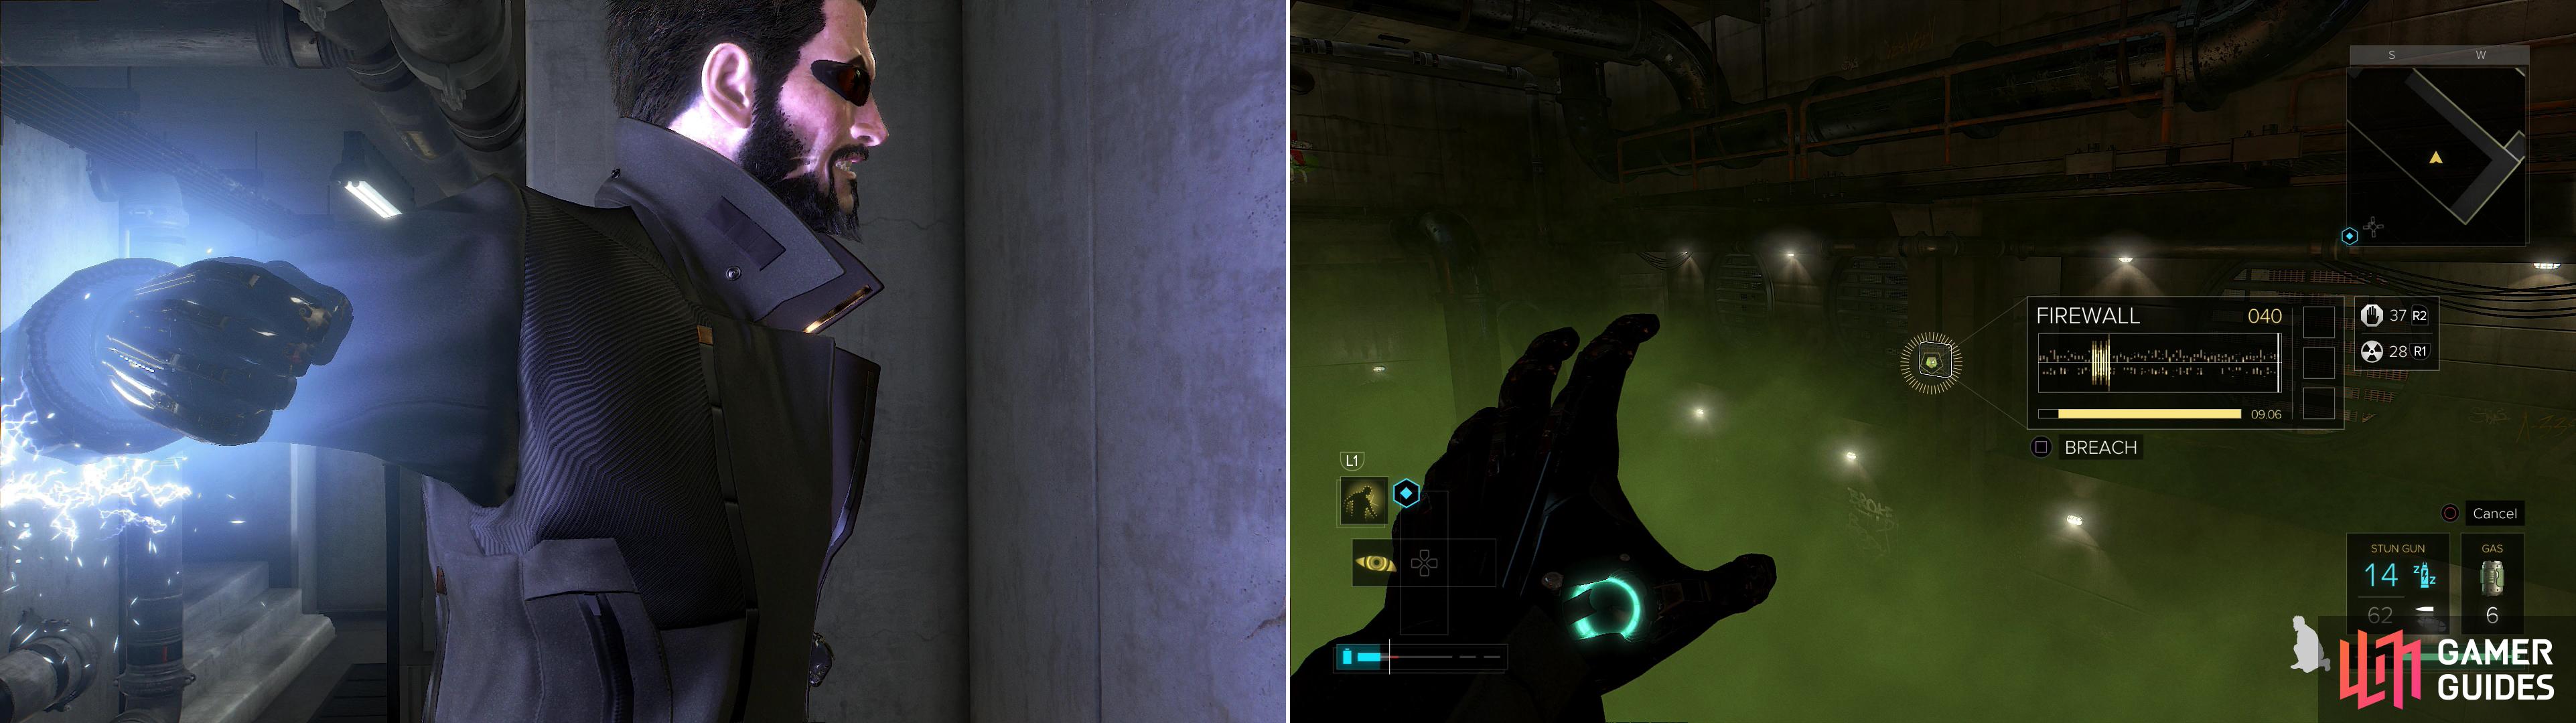 Smash through a weak section of wall to escape the Palisade Property Bank (left), then use Remote Hacking to cleanse a gas-filled chamber you must pass through to escape (right).